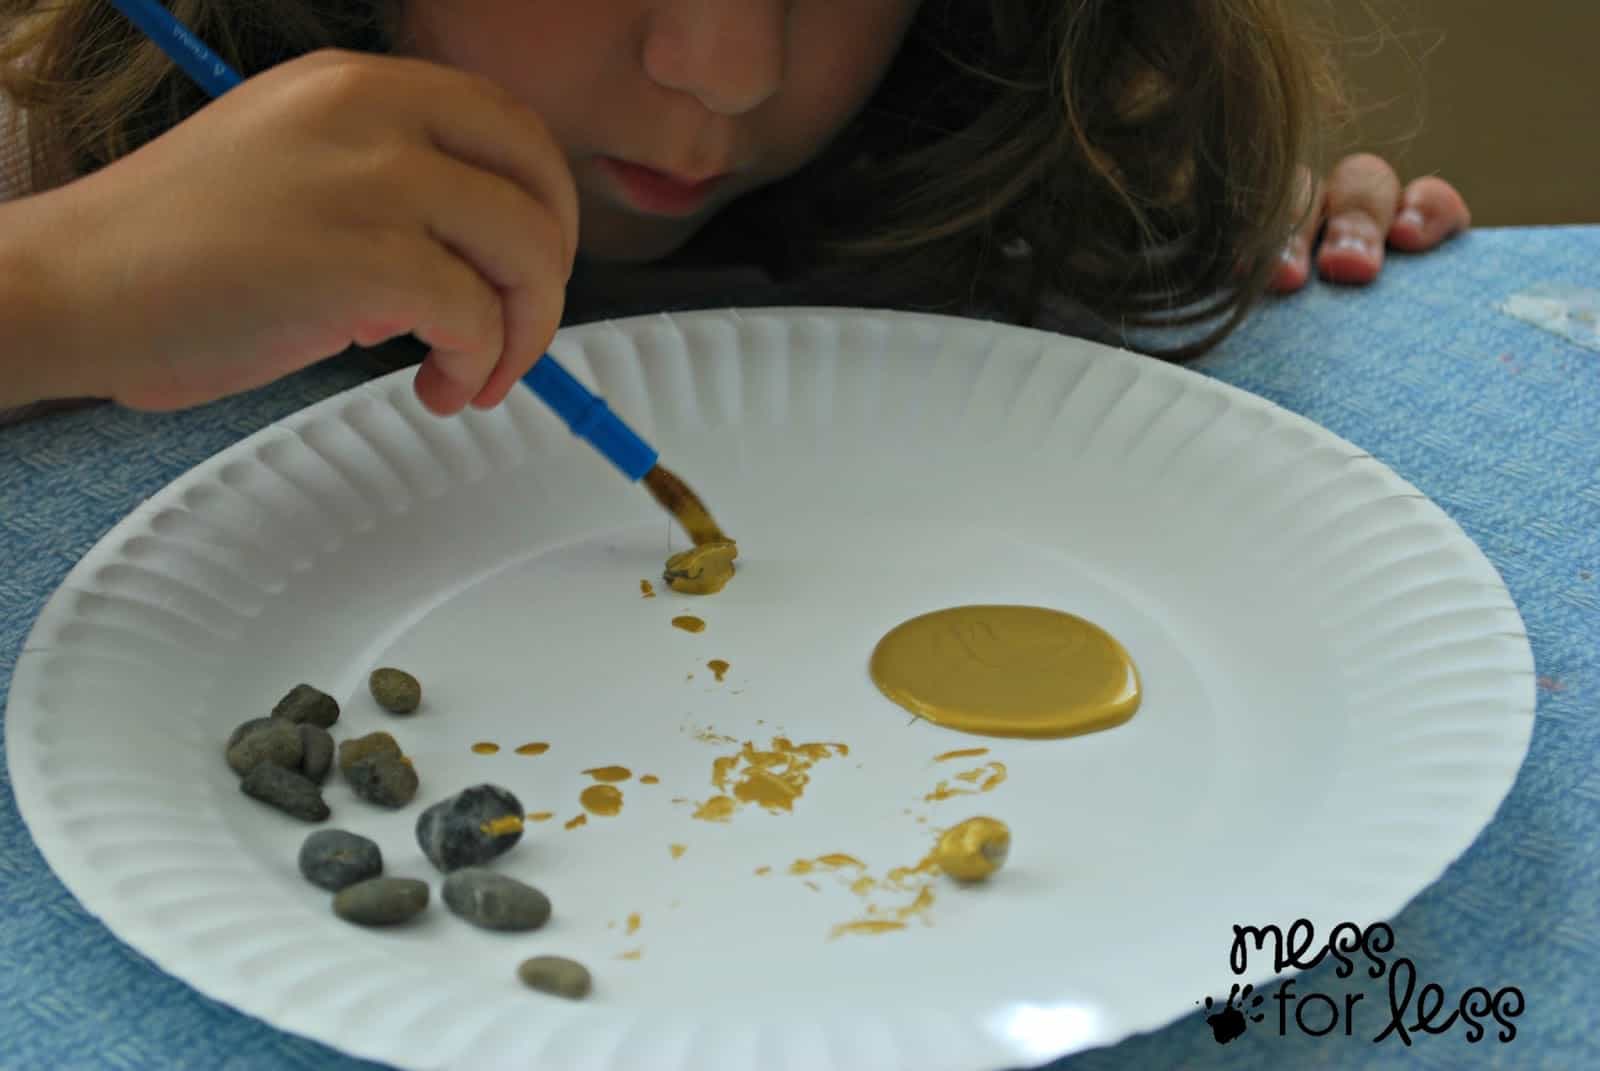 How to Get Started How to Pan for Gold with Kids • RUN WILD MY CHILD